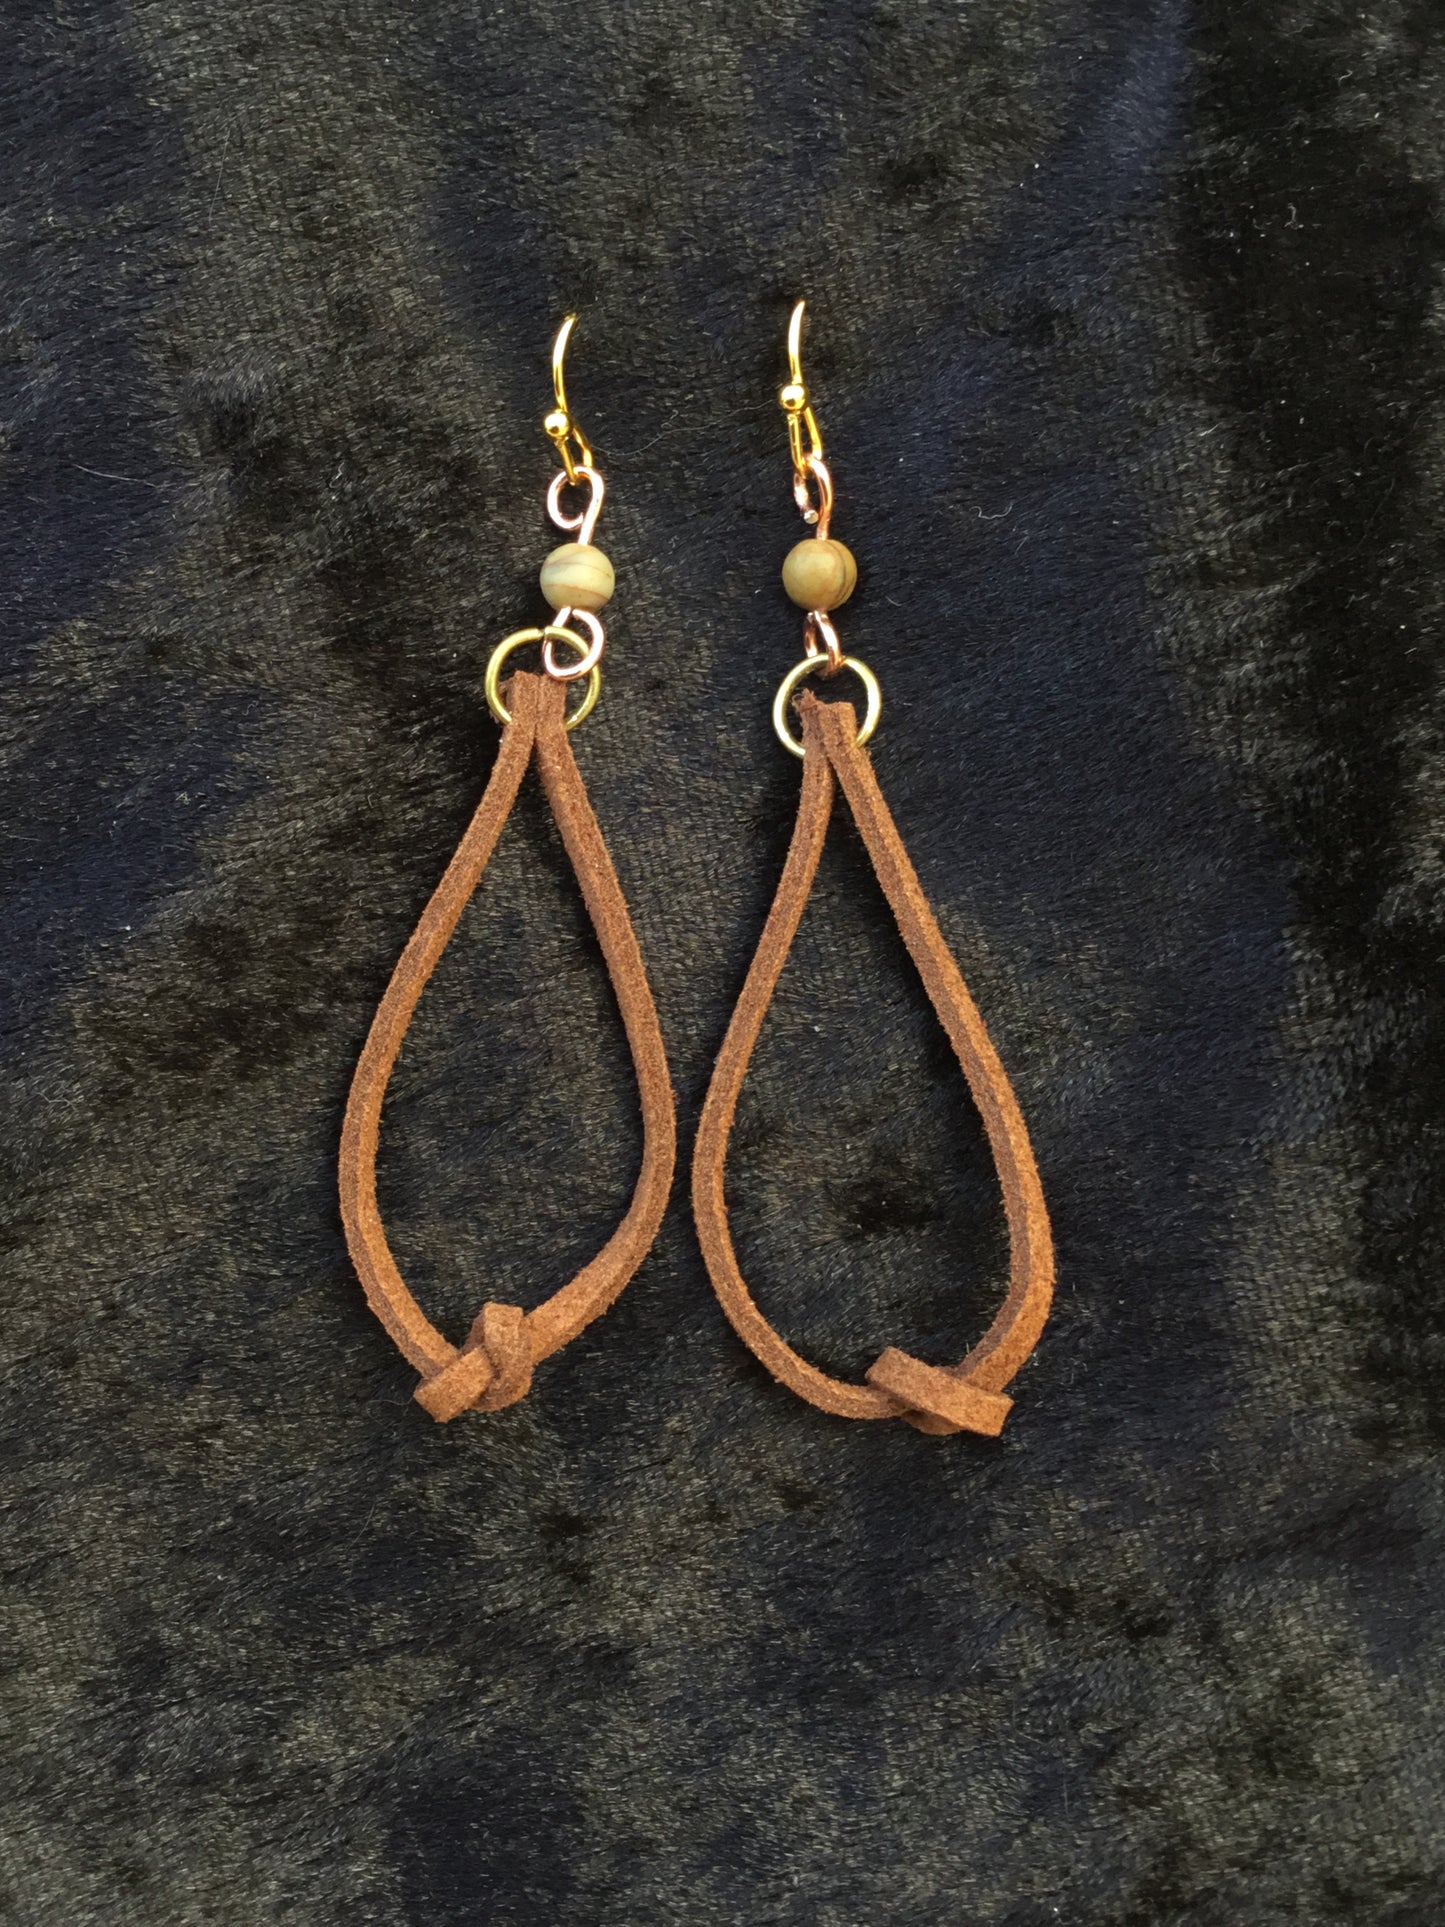 Brown leather cord knot earrings with bead